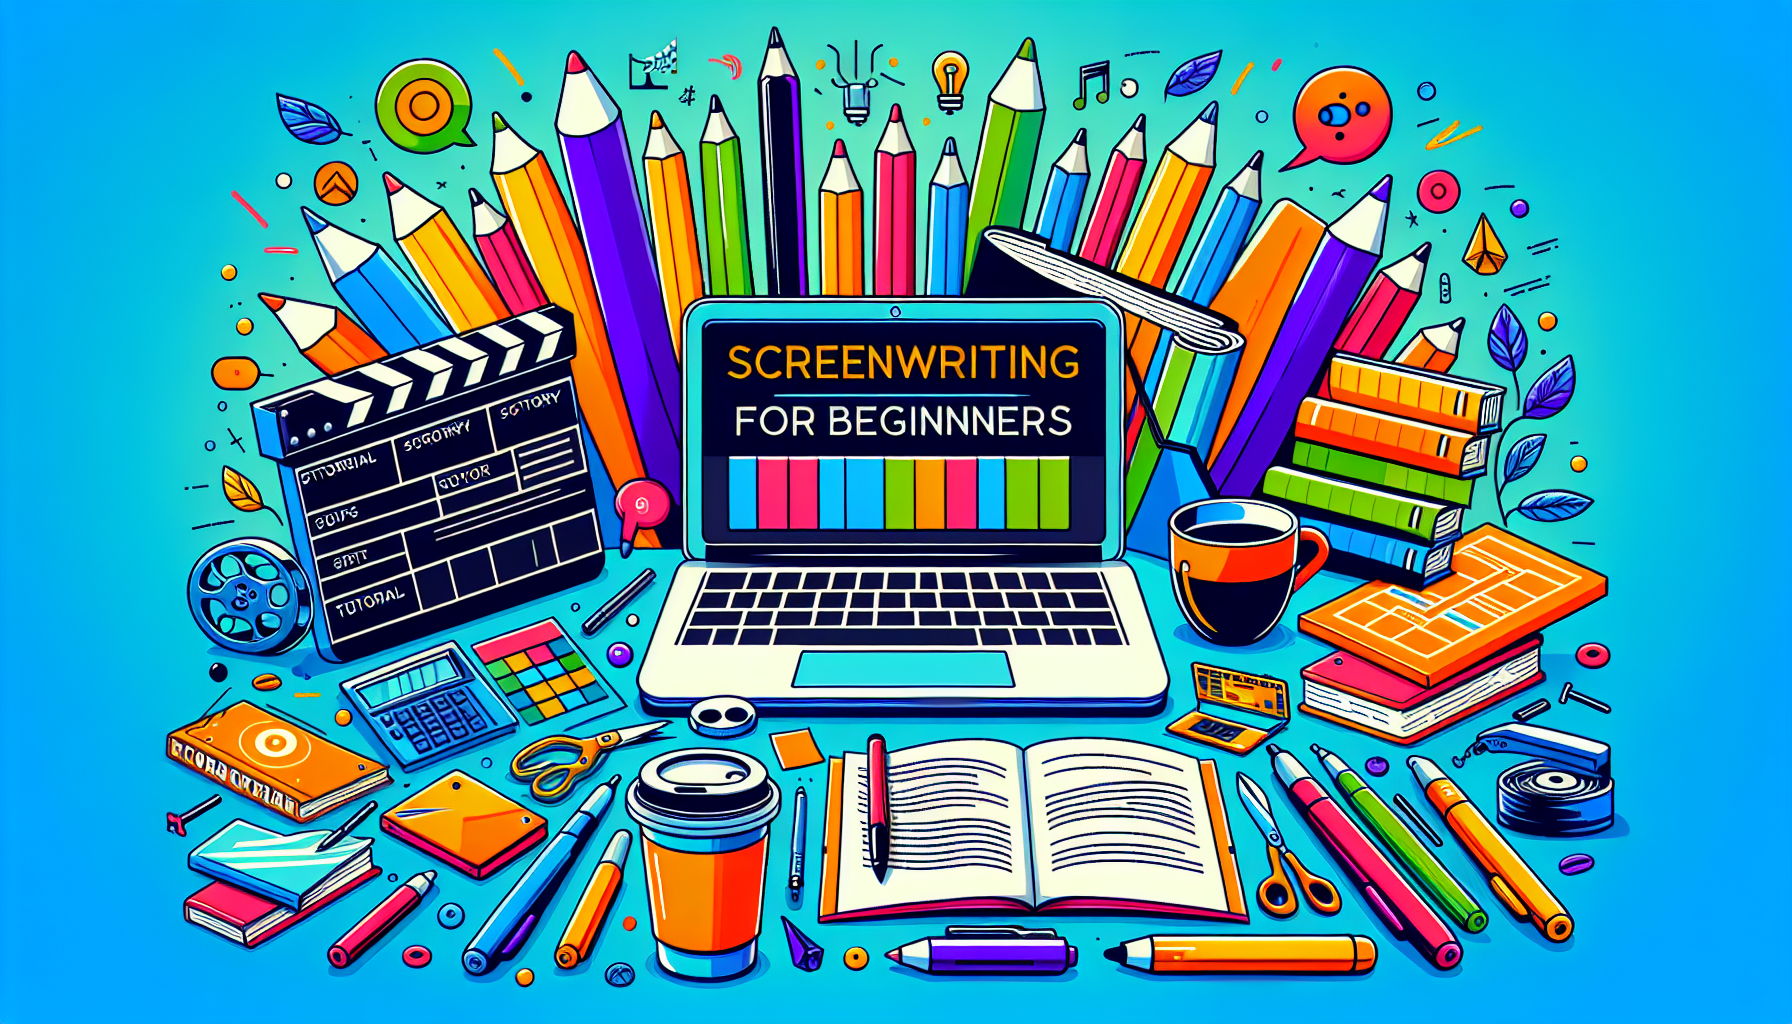 Create a colorful and modern digital illustration showcasing free screenwriting resources for beginners. The image should contain a desktop with a laptop and screenplay, different colored pens on the side, tutorial books, a storyboard with various shots highlighted, a cup of coffee, and a clapperboard, all set against a vibrant backdrop. Ensure it is intuitive and easy to understand. Note: This image should not contain any text.